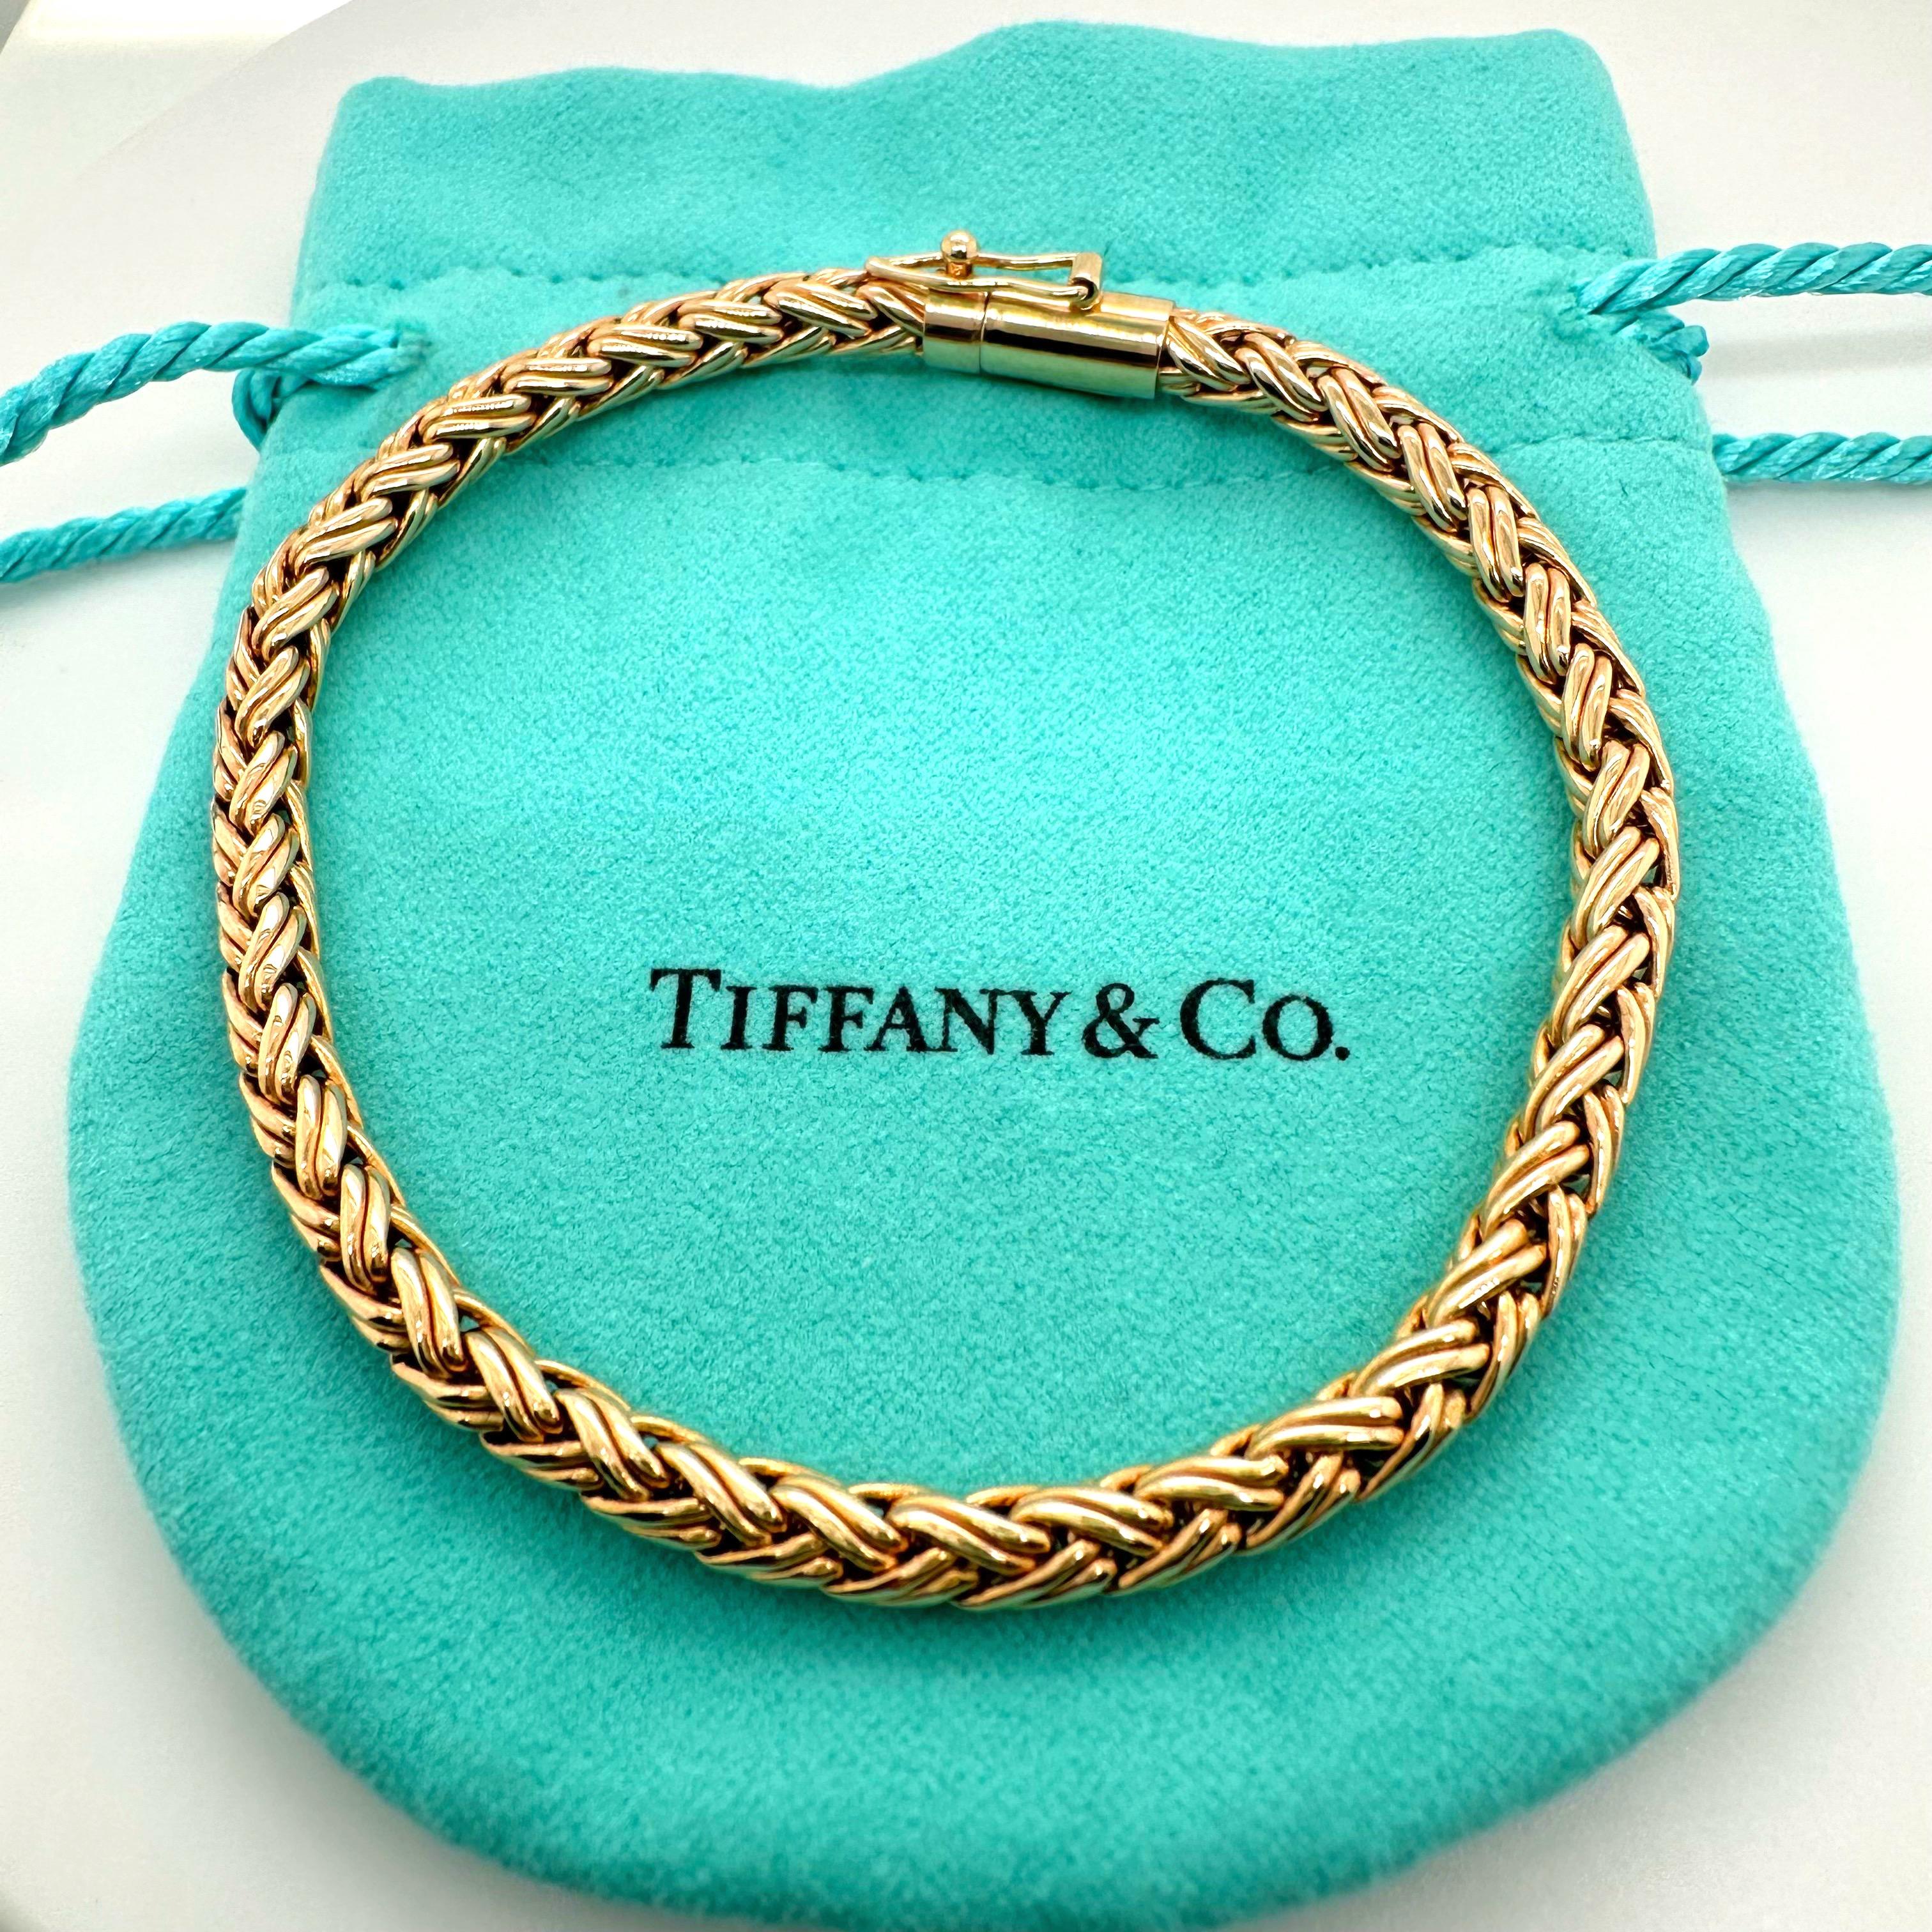 Tiffany & Co. Wheat Braided Rope Bracelet in 14k Yellow Gold For Sale 4